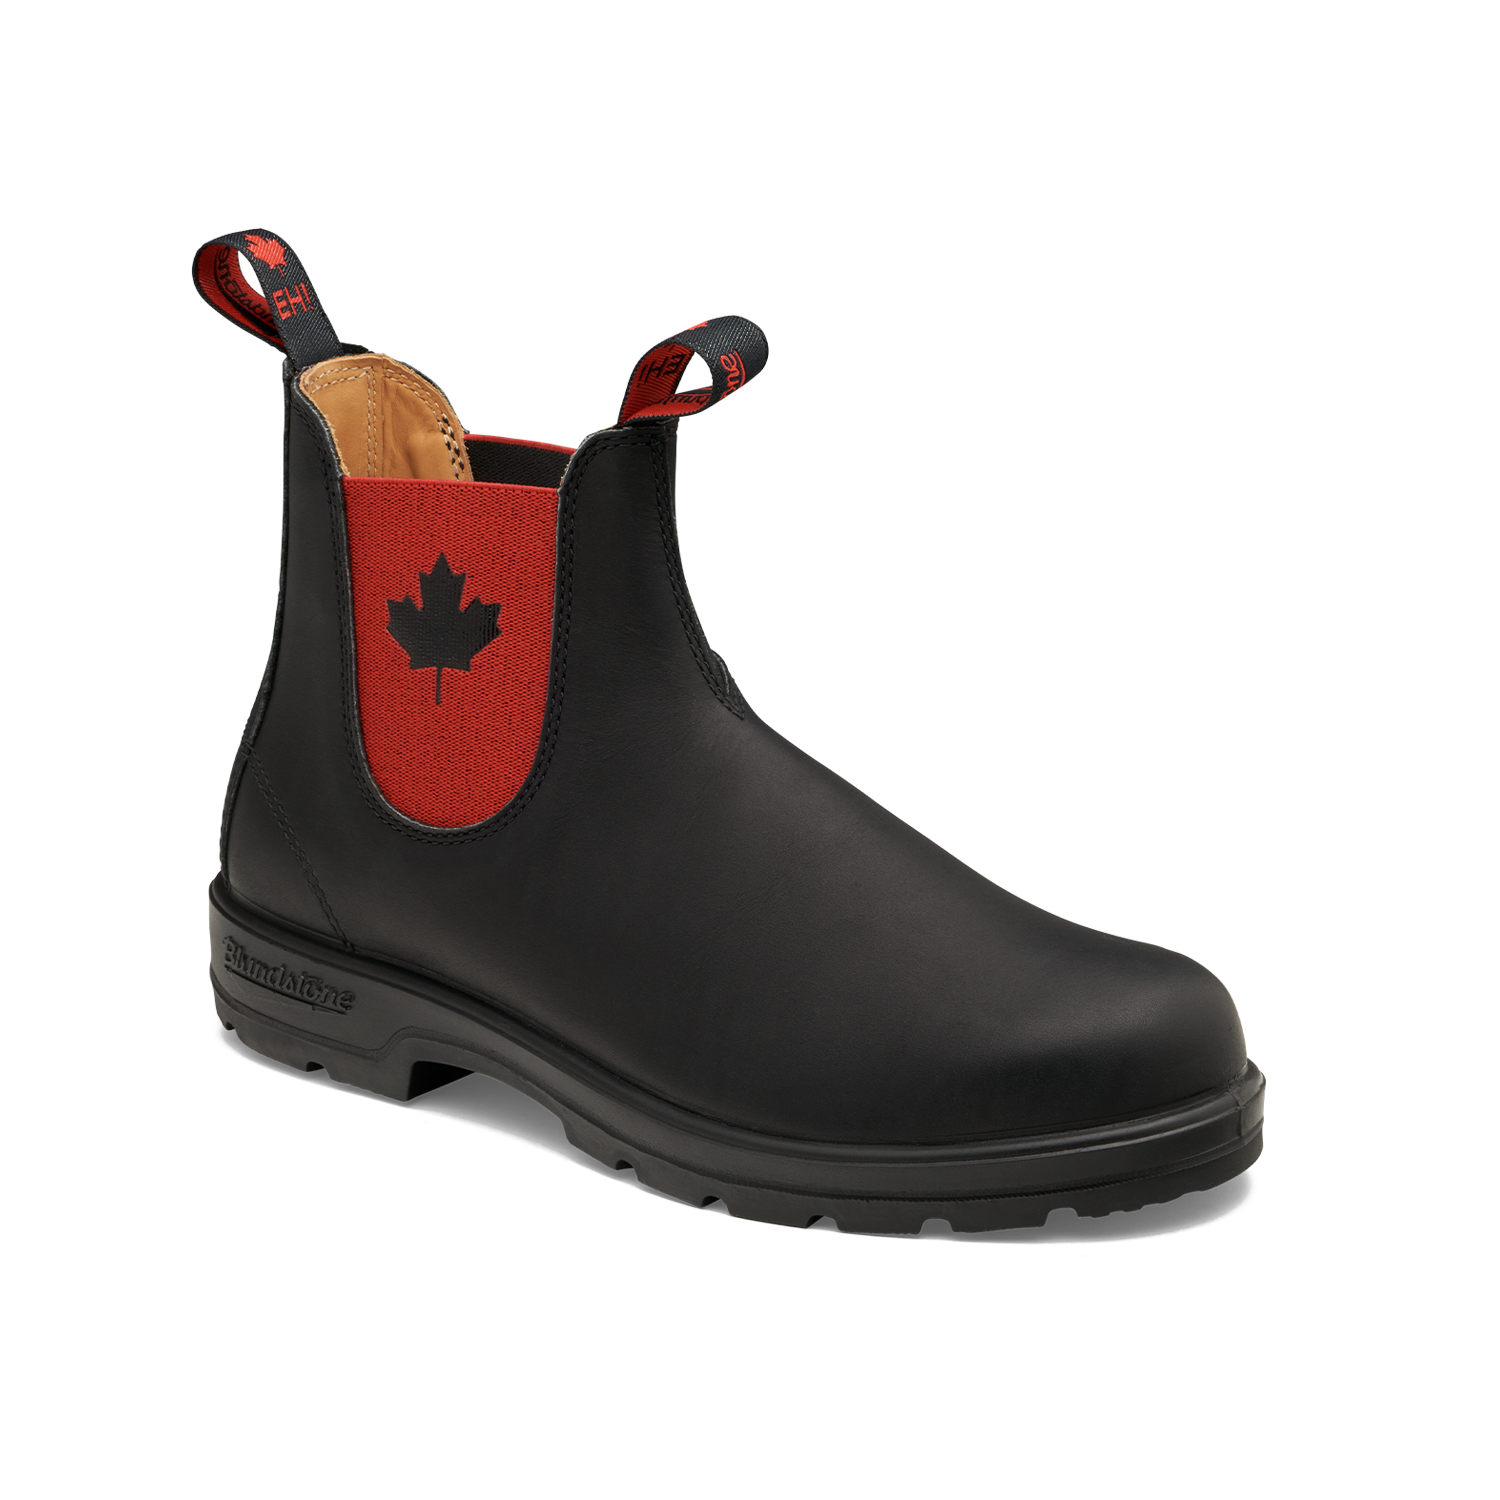 Blundstone 1474 Classic Eh! Boot Black with Red Elastic